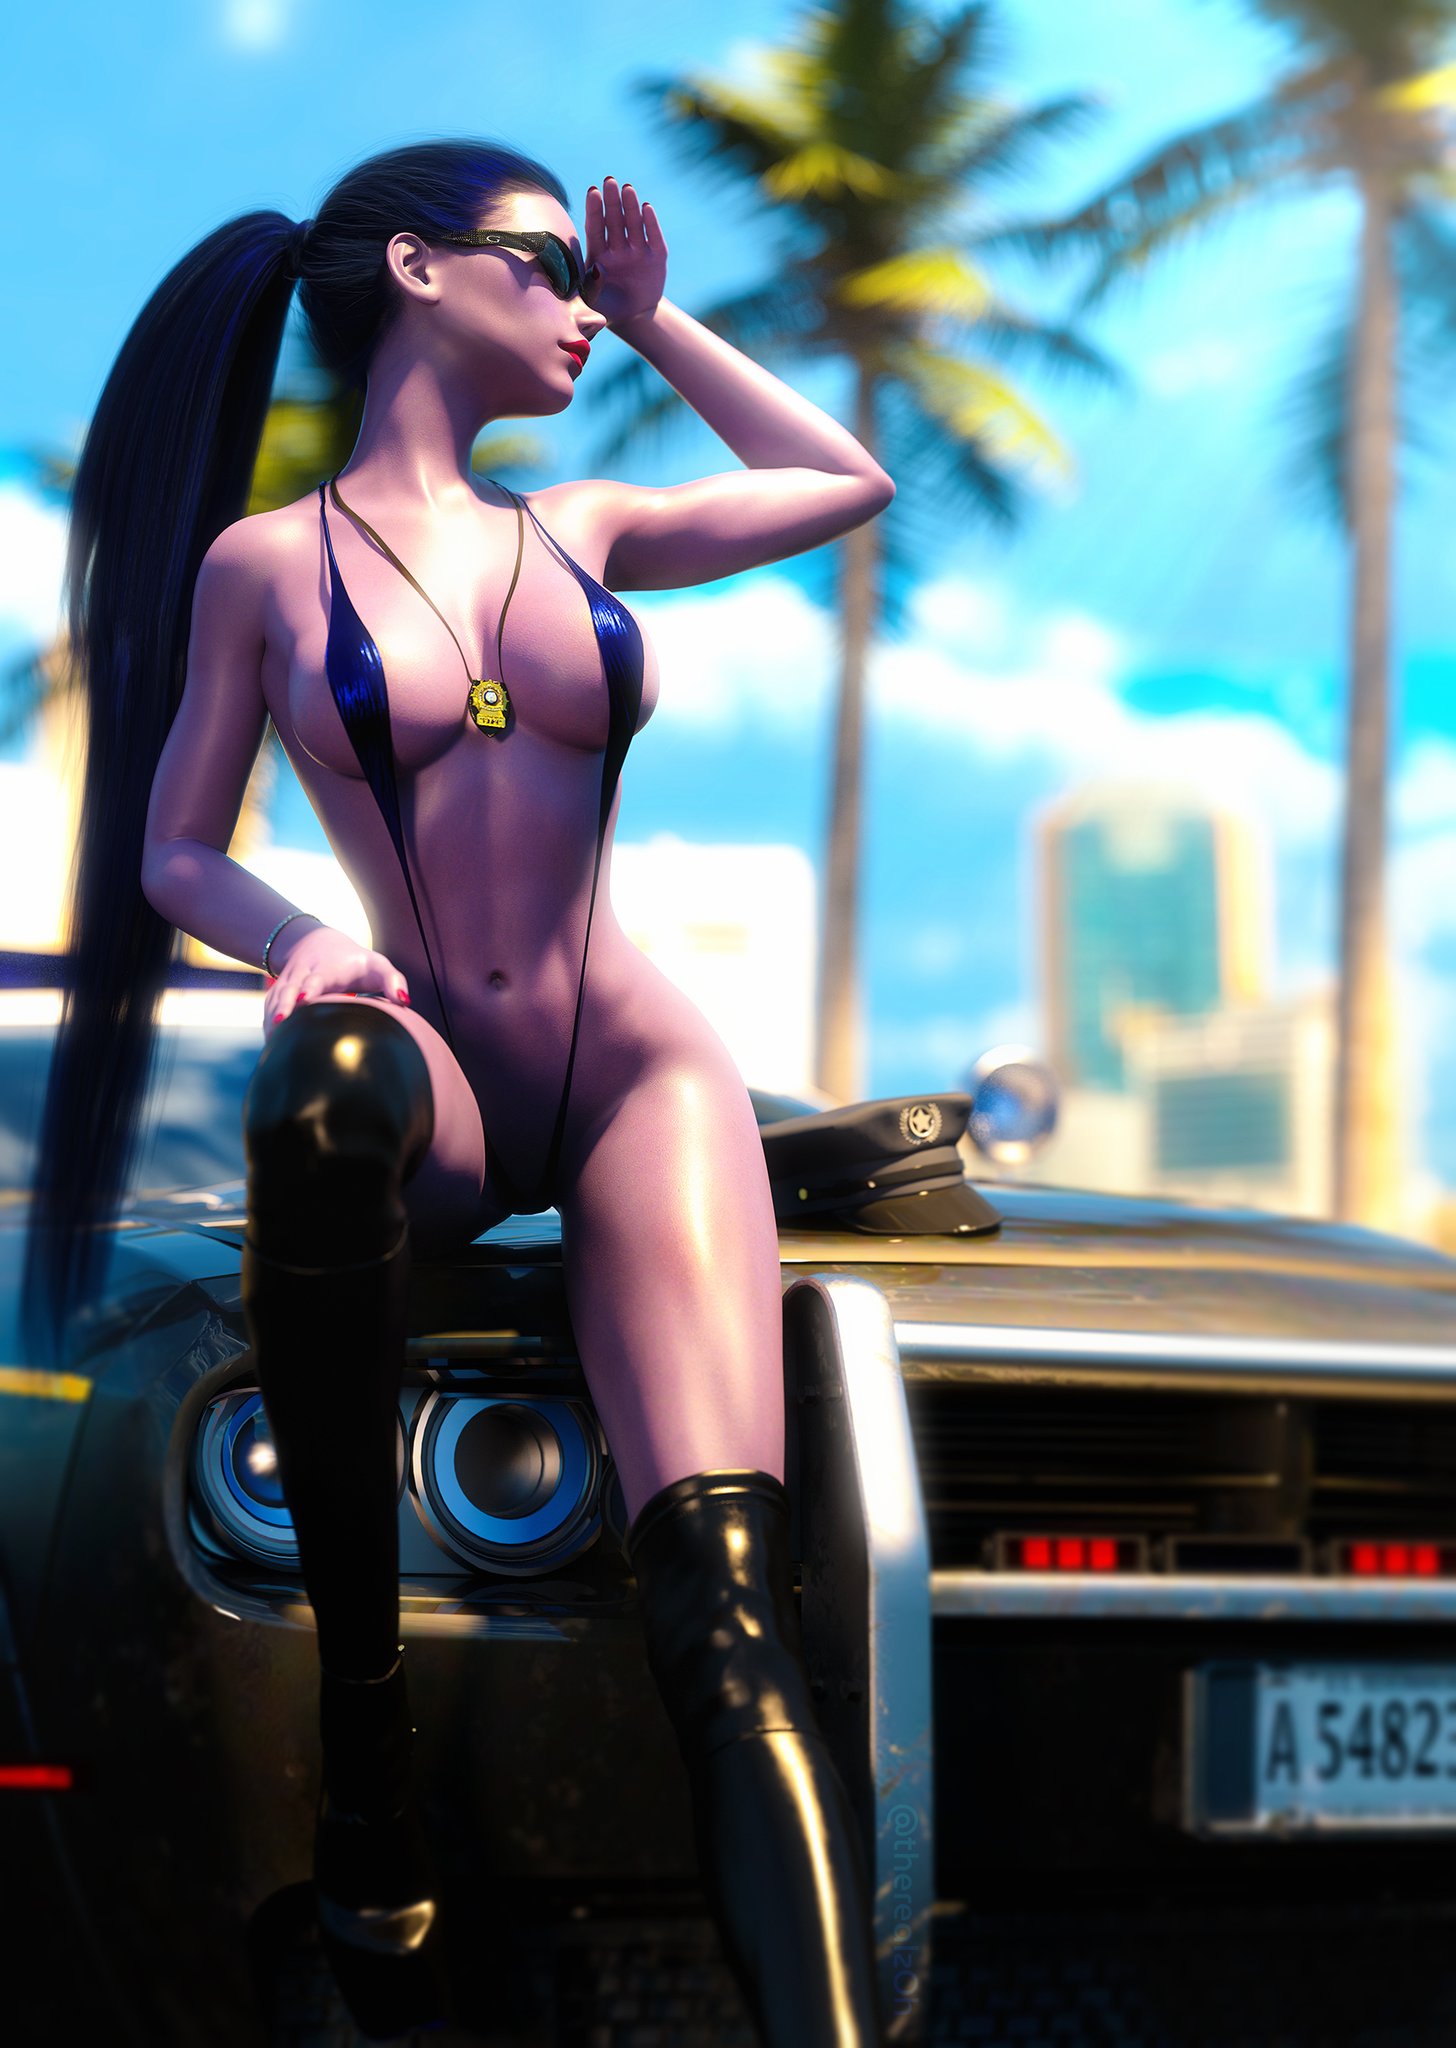 “#Widowmaker - https://t.co/Z8PkVqmme5 #Overwatch #TherealzOh #nsfw #rule34...